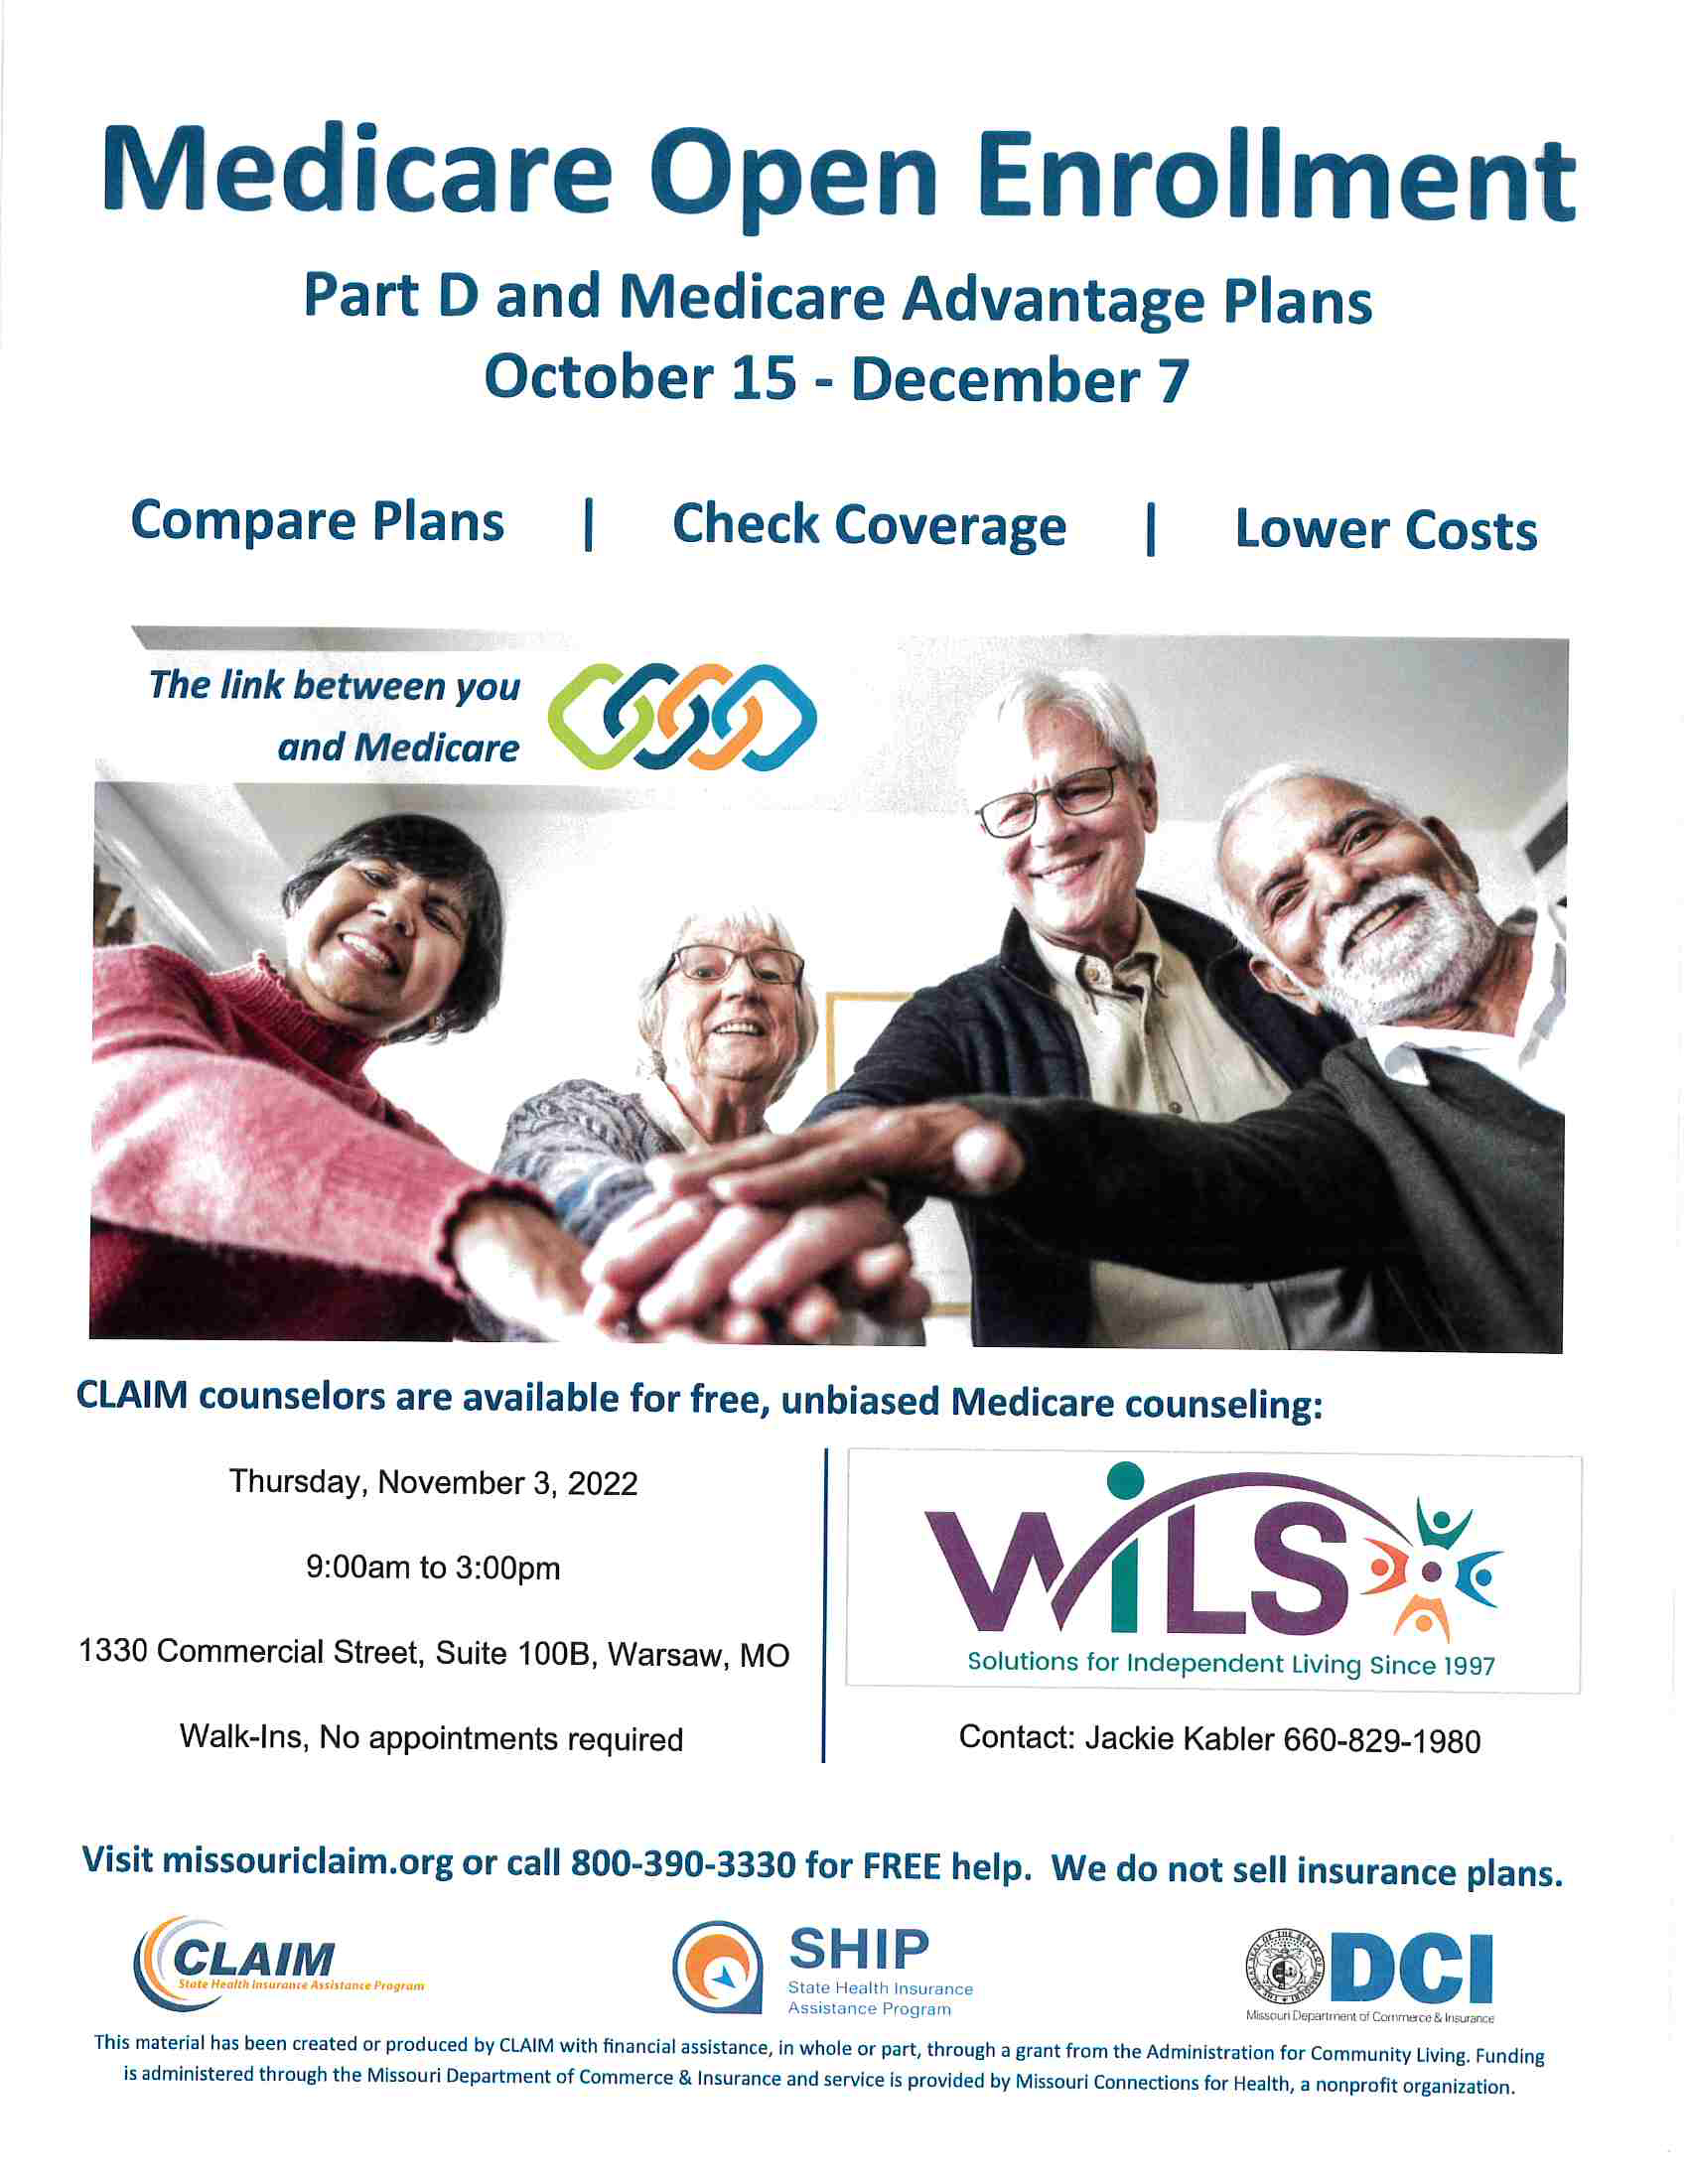 Medicare Open Enrollment  Part D and Medicare Advantage Plans  October 15 - December 7 Compare Plans, Check Coverage, and Lower Costs. CLAIM counselors are available for free, unbiased Medicare counseling at WILS. Jackie Kabler at 660-829-1980. Visit missouriclaim.org or call 800-390-3330 for FREE help. We do not sell insurance plans. Thursday November 3, 2022 9am -3pm  1330 Commercial St., Suite 100B Warsaw, MO